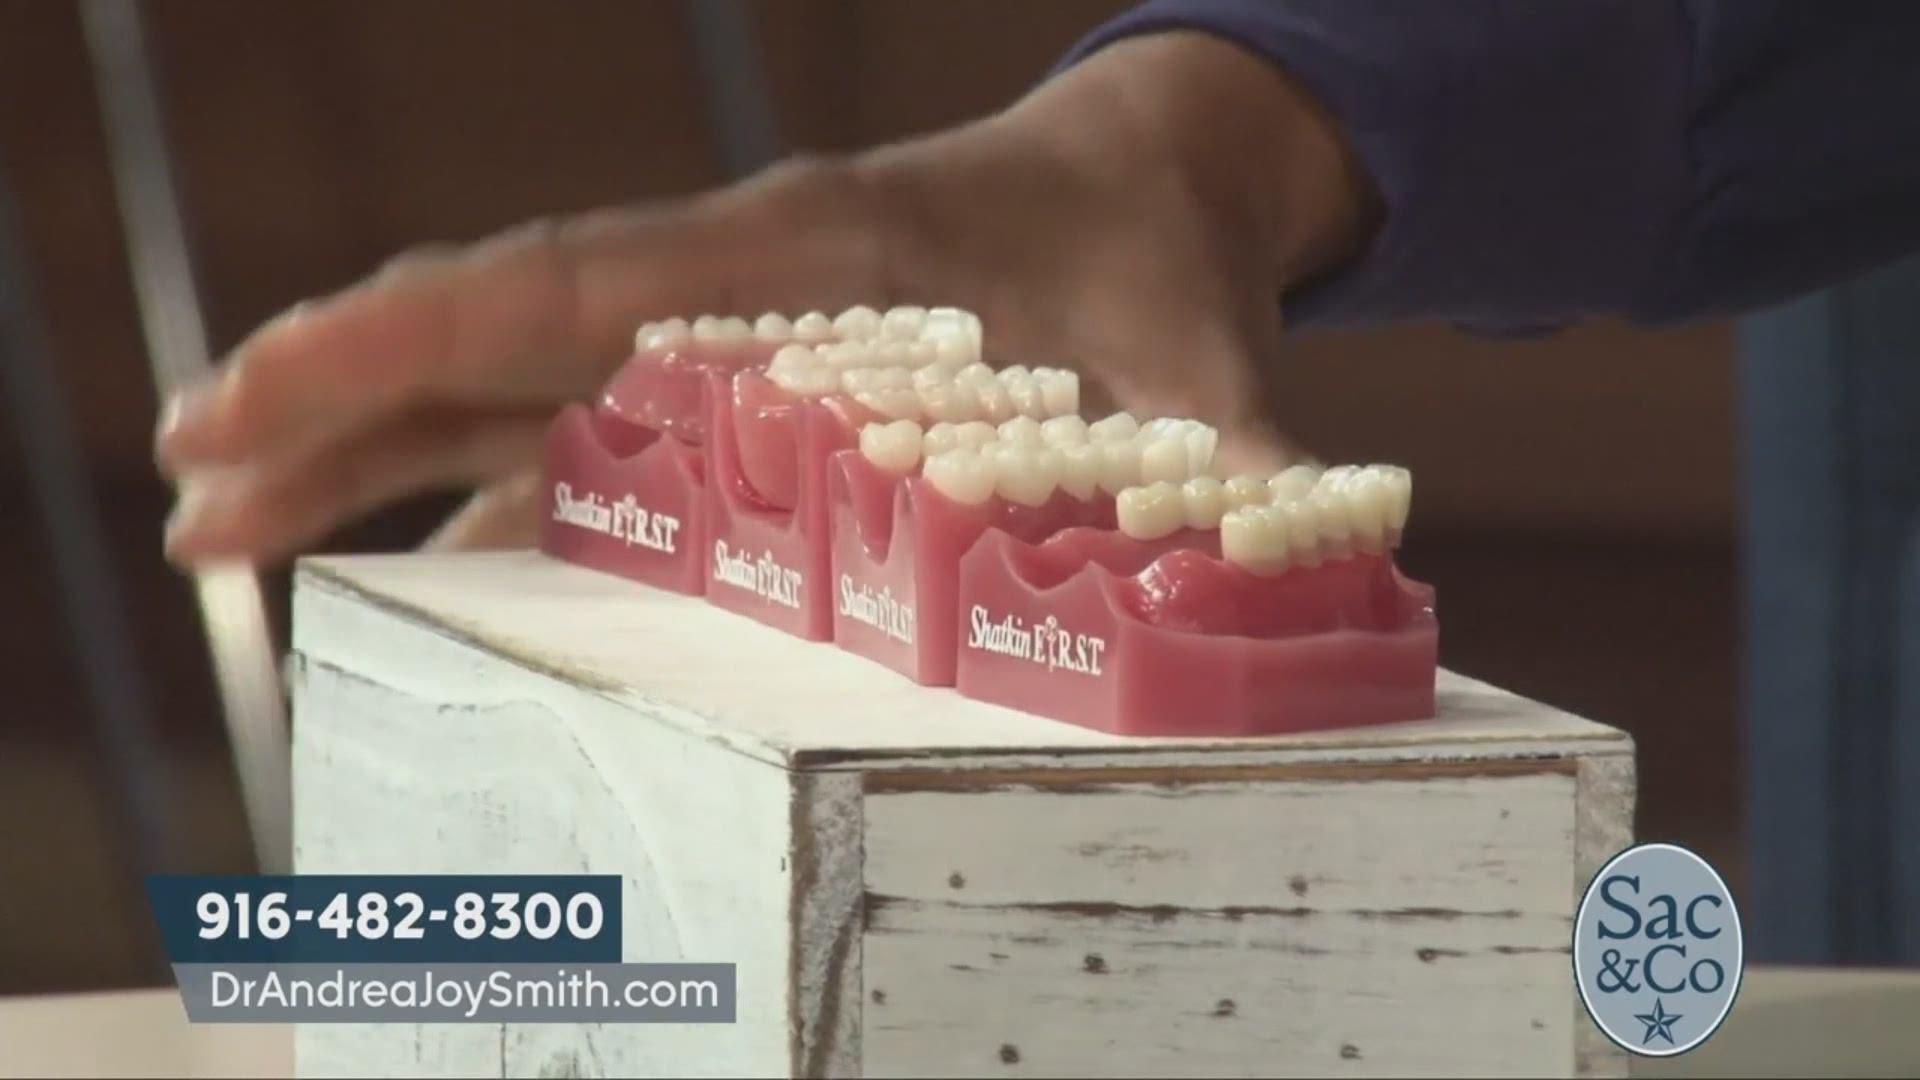 Mellisa Paul chats with Dr. Andrea Joy Smith about how mini-dental implants may be able to perfect your smile without the use of removeable appliances. The following is a paid segment sponsored by Dr. Andrea Joy Smith.